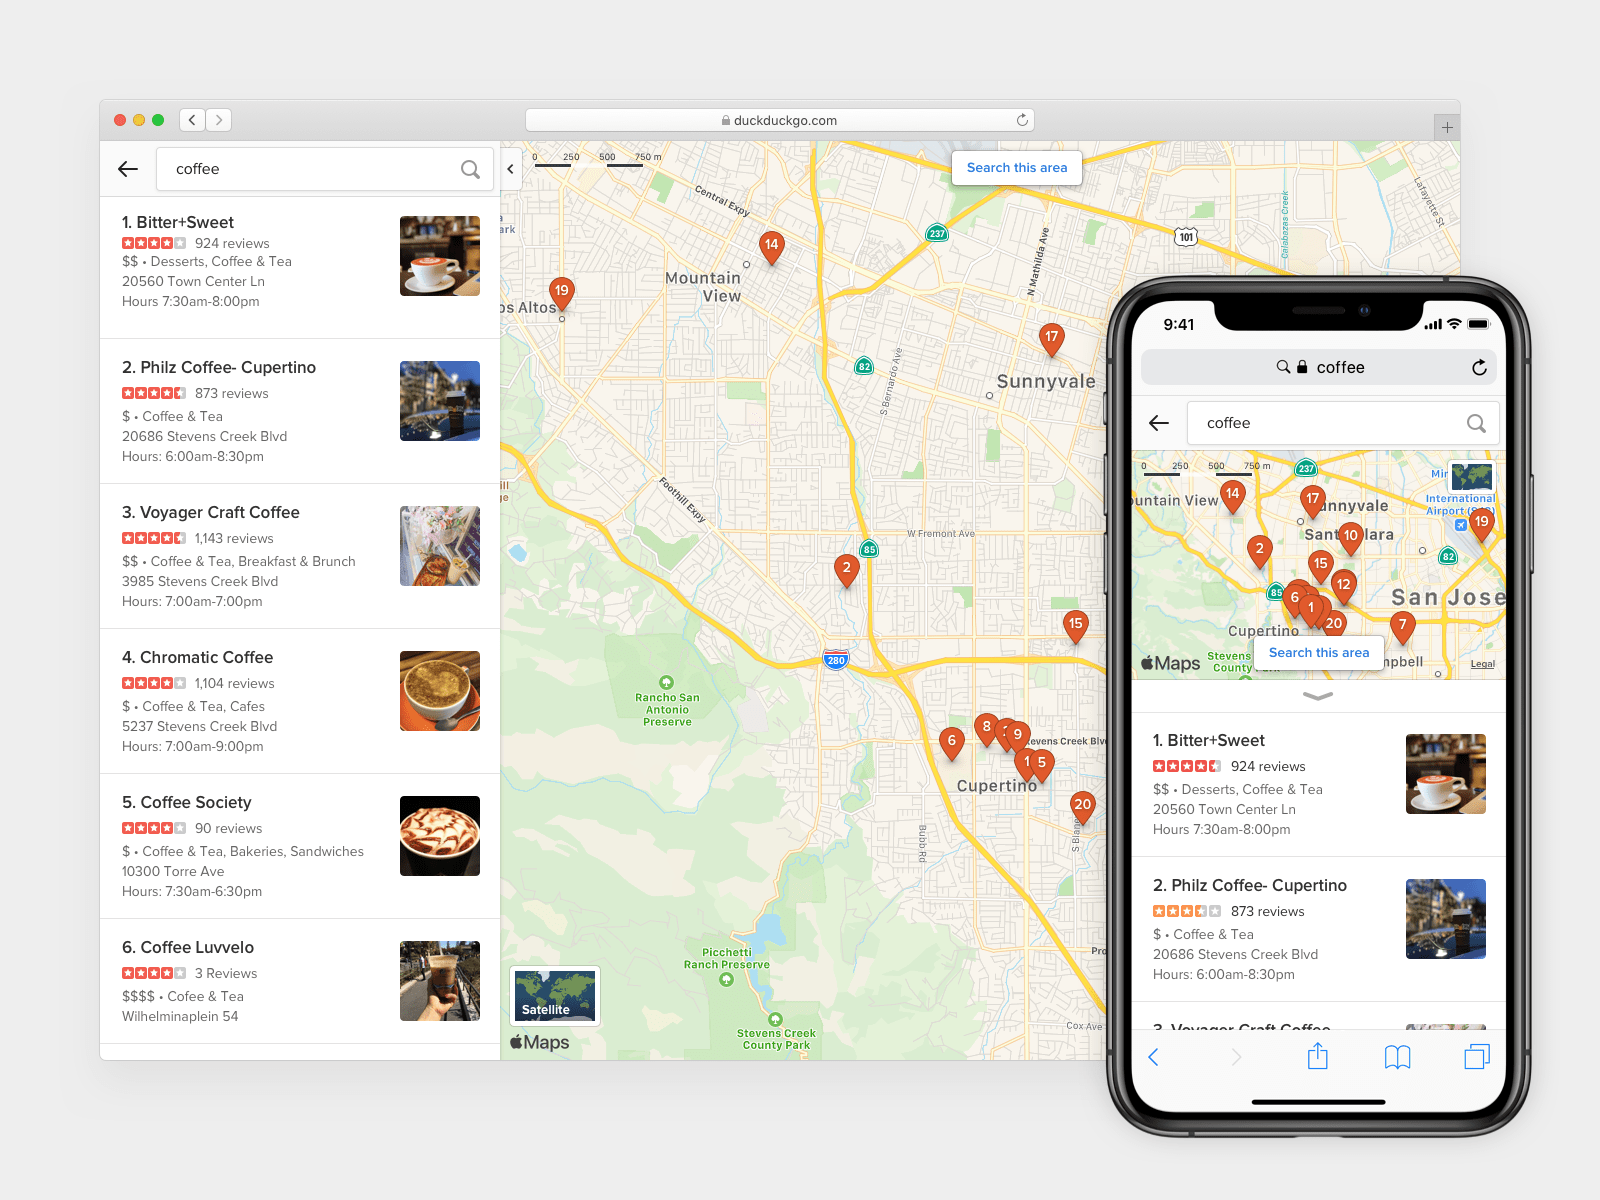 How To Use DuckDuckGo Maps